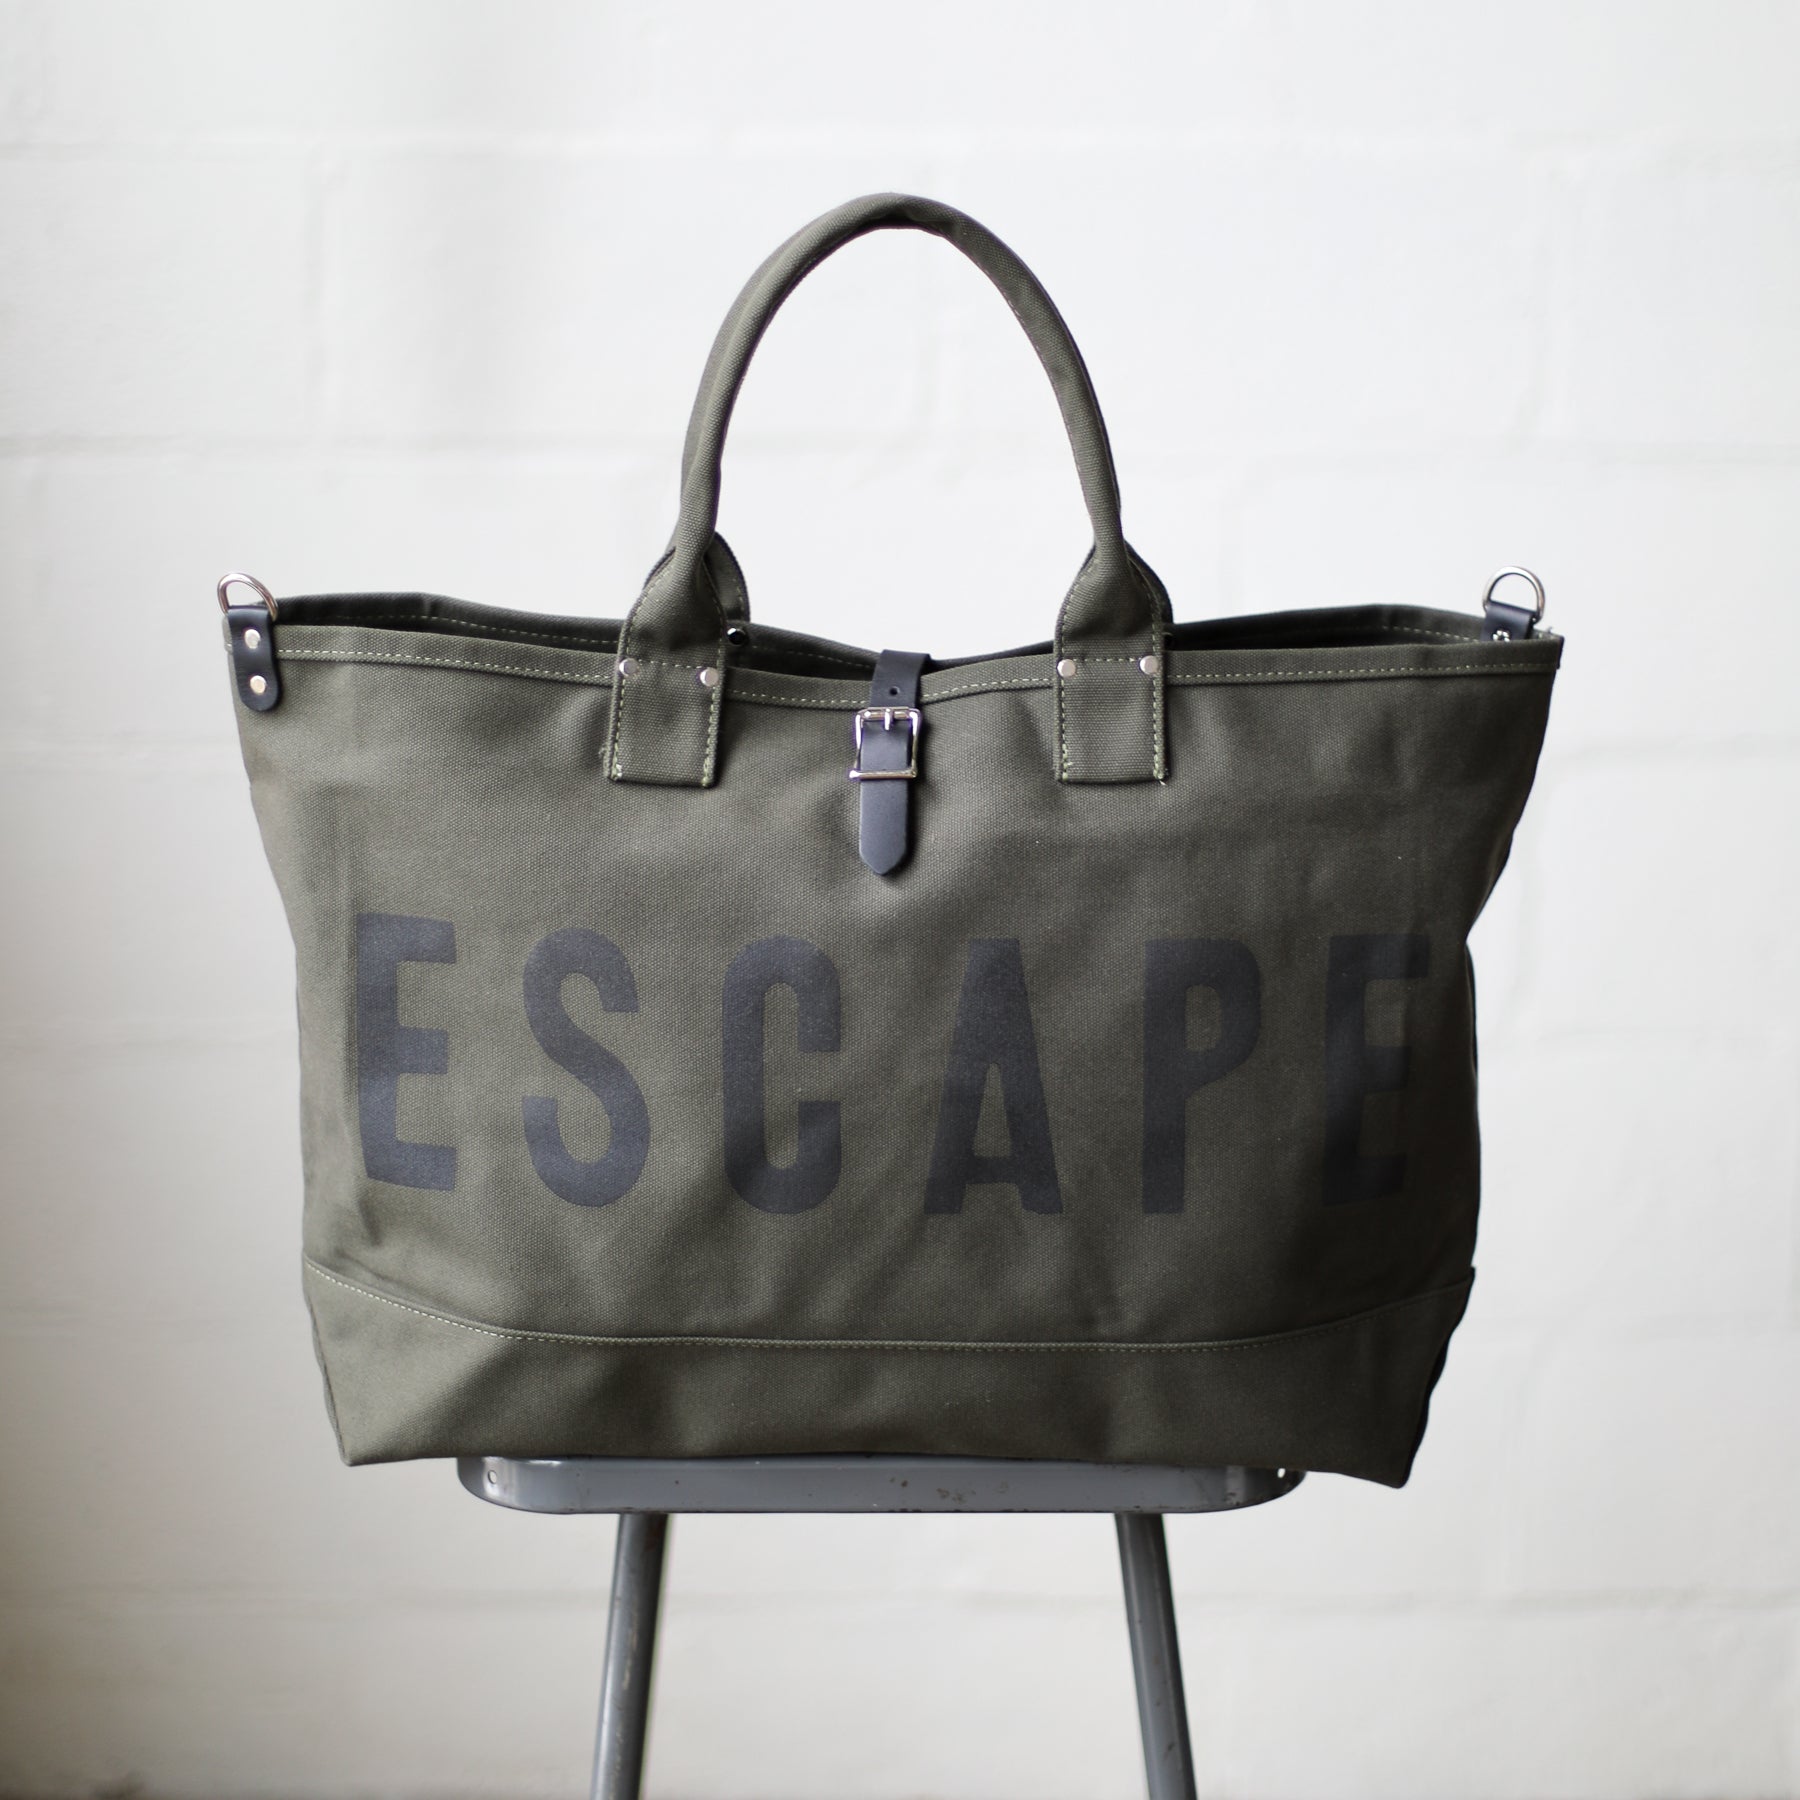 ESCAPE Cargo Bag in Olive